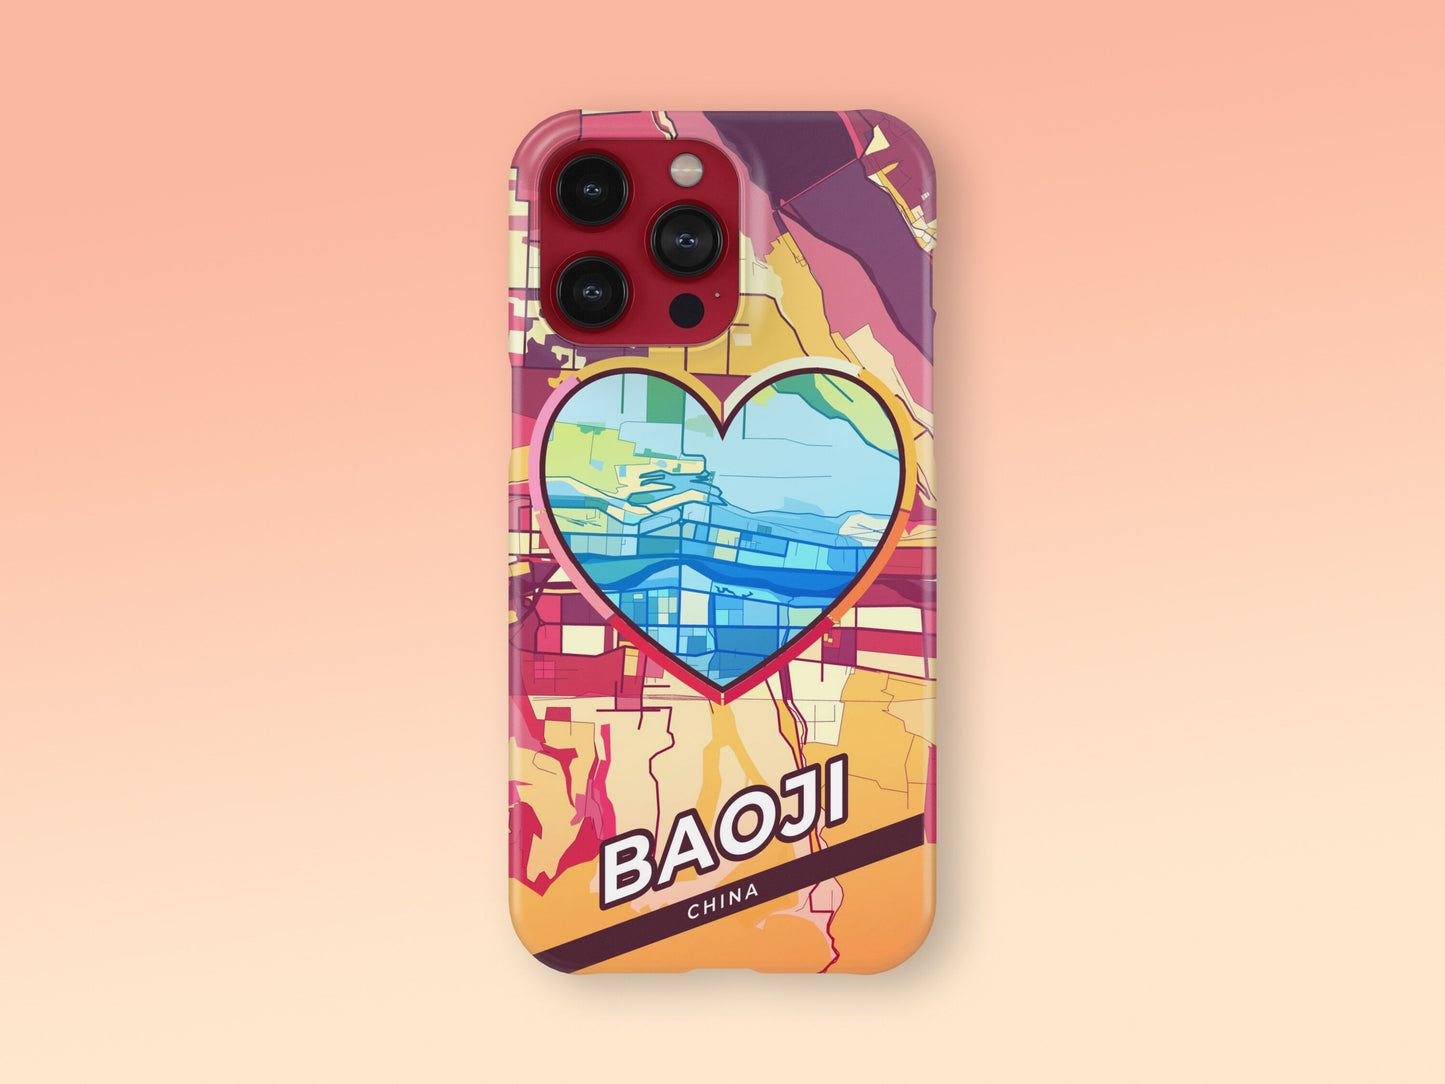 Baoji China slim phone case with colorful icon. Birthday, wedding or housewarming gift. Couple match cases. 2